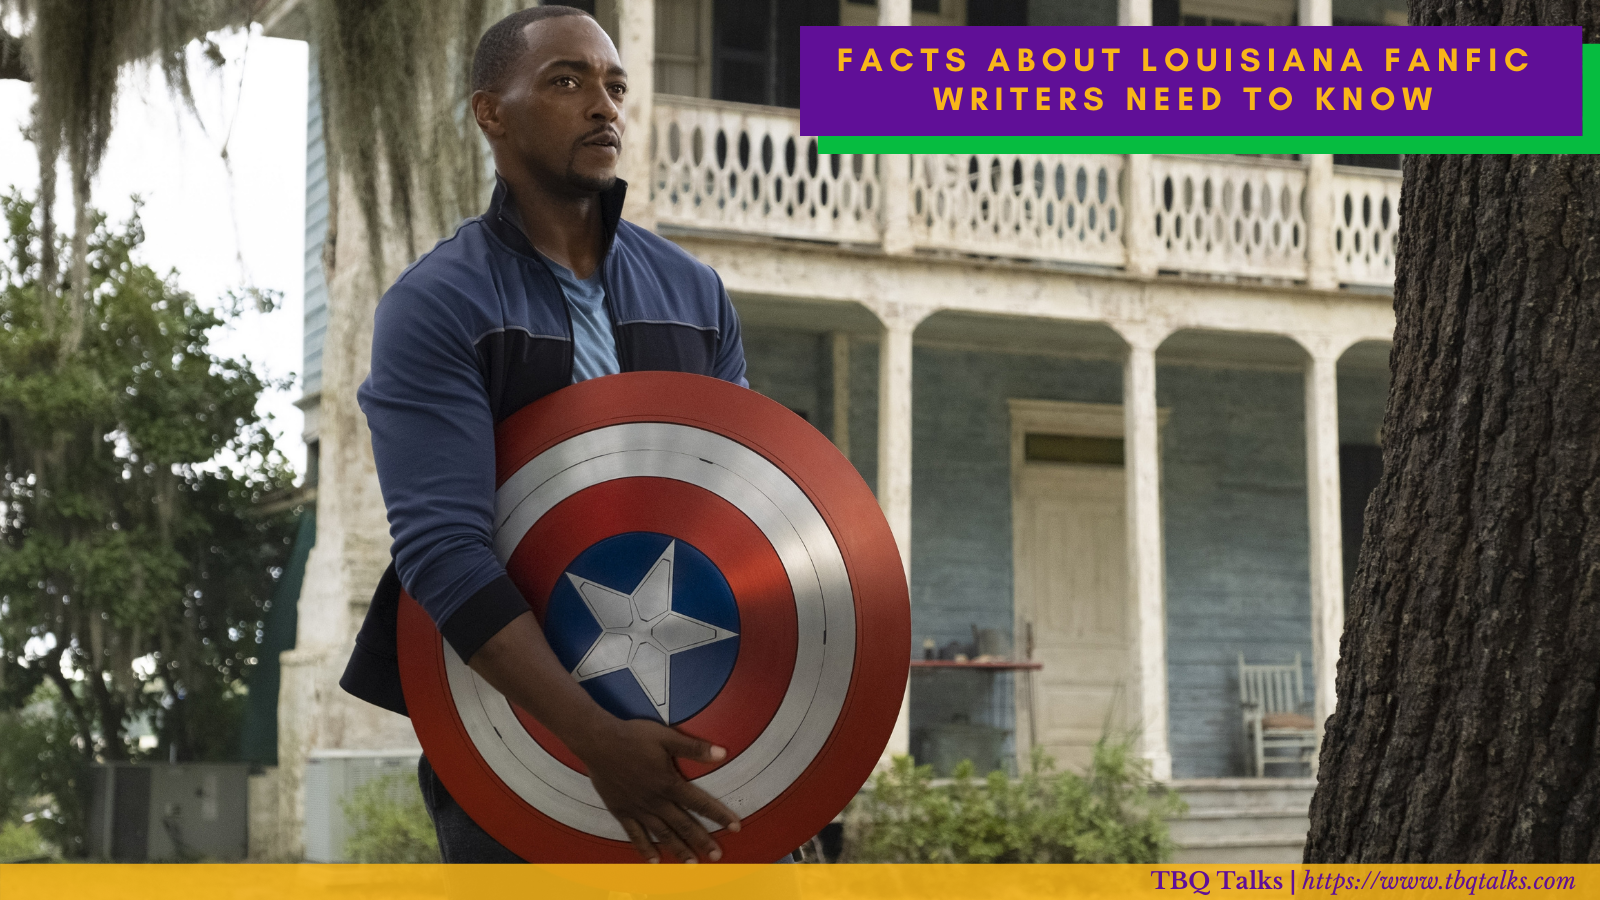 Facts About Louisiana Fanfic Writers Need to Know